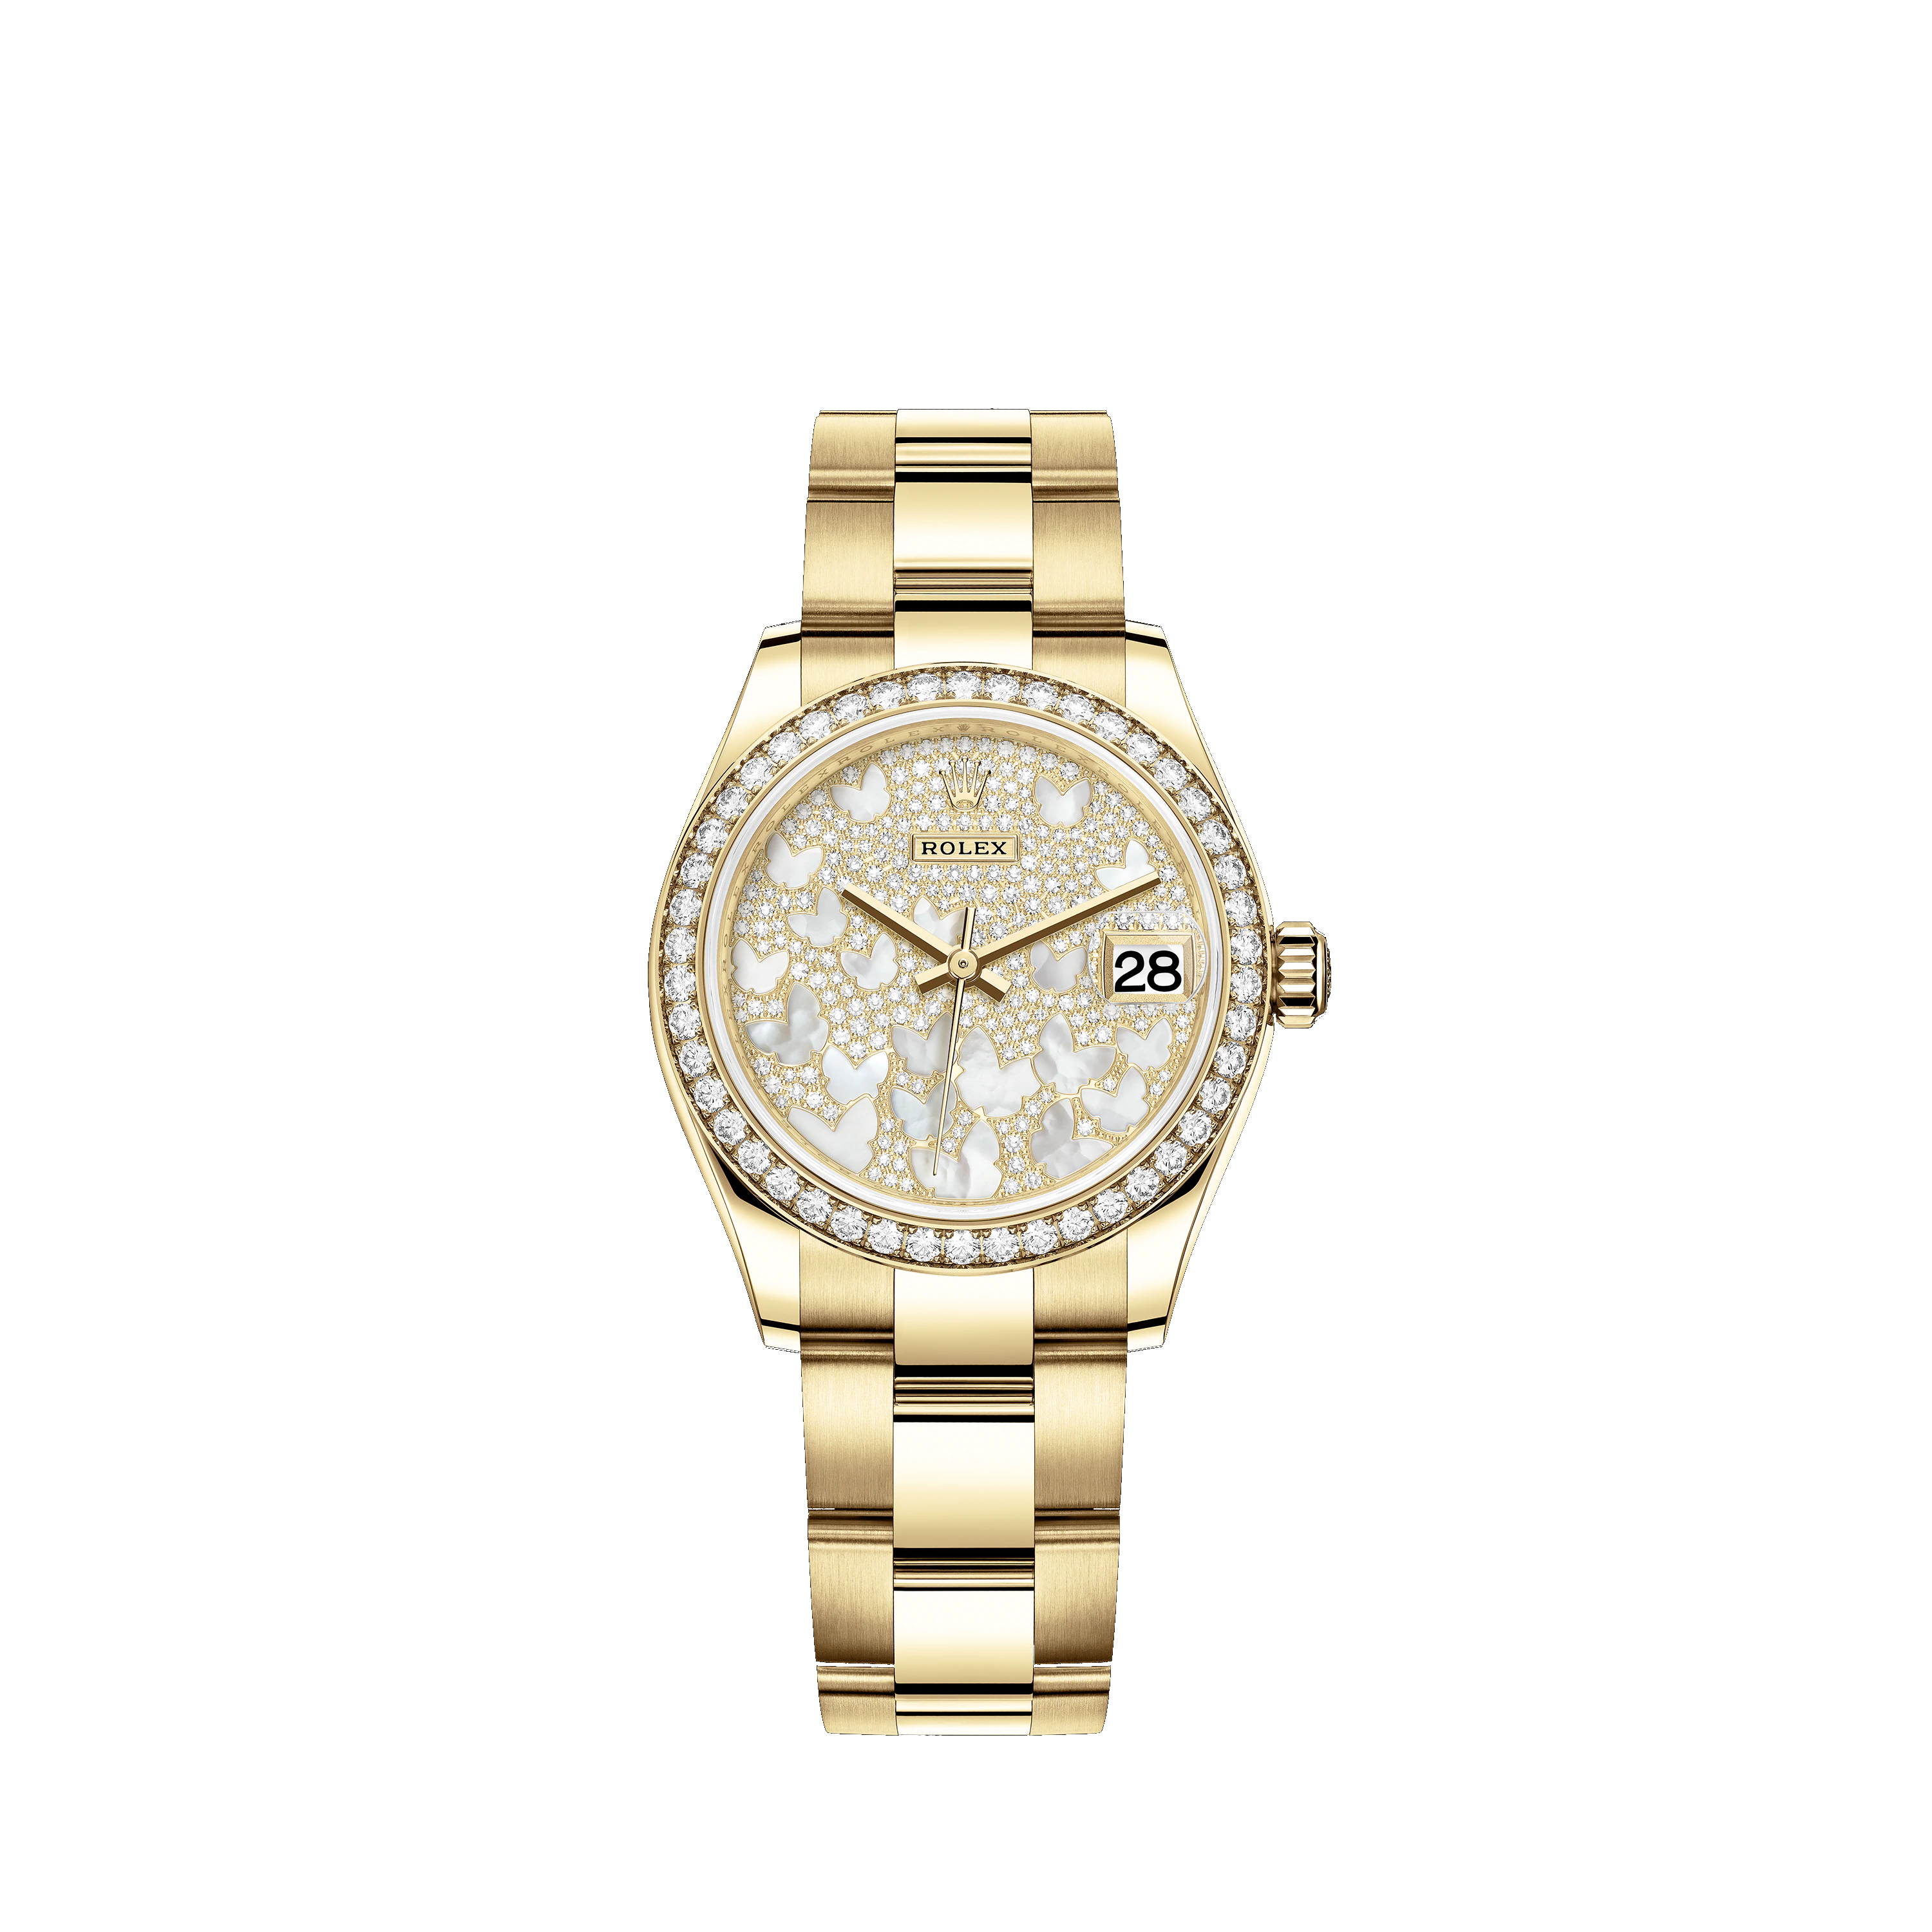 Datejust 31 278288RBR Gold & Diamonds Watch (Paved, Mother-of-Pearl Butterfly)